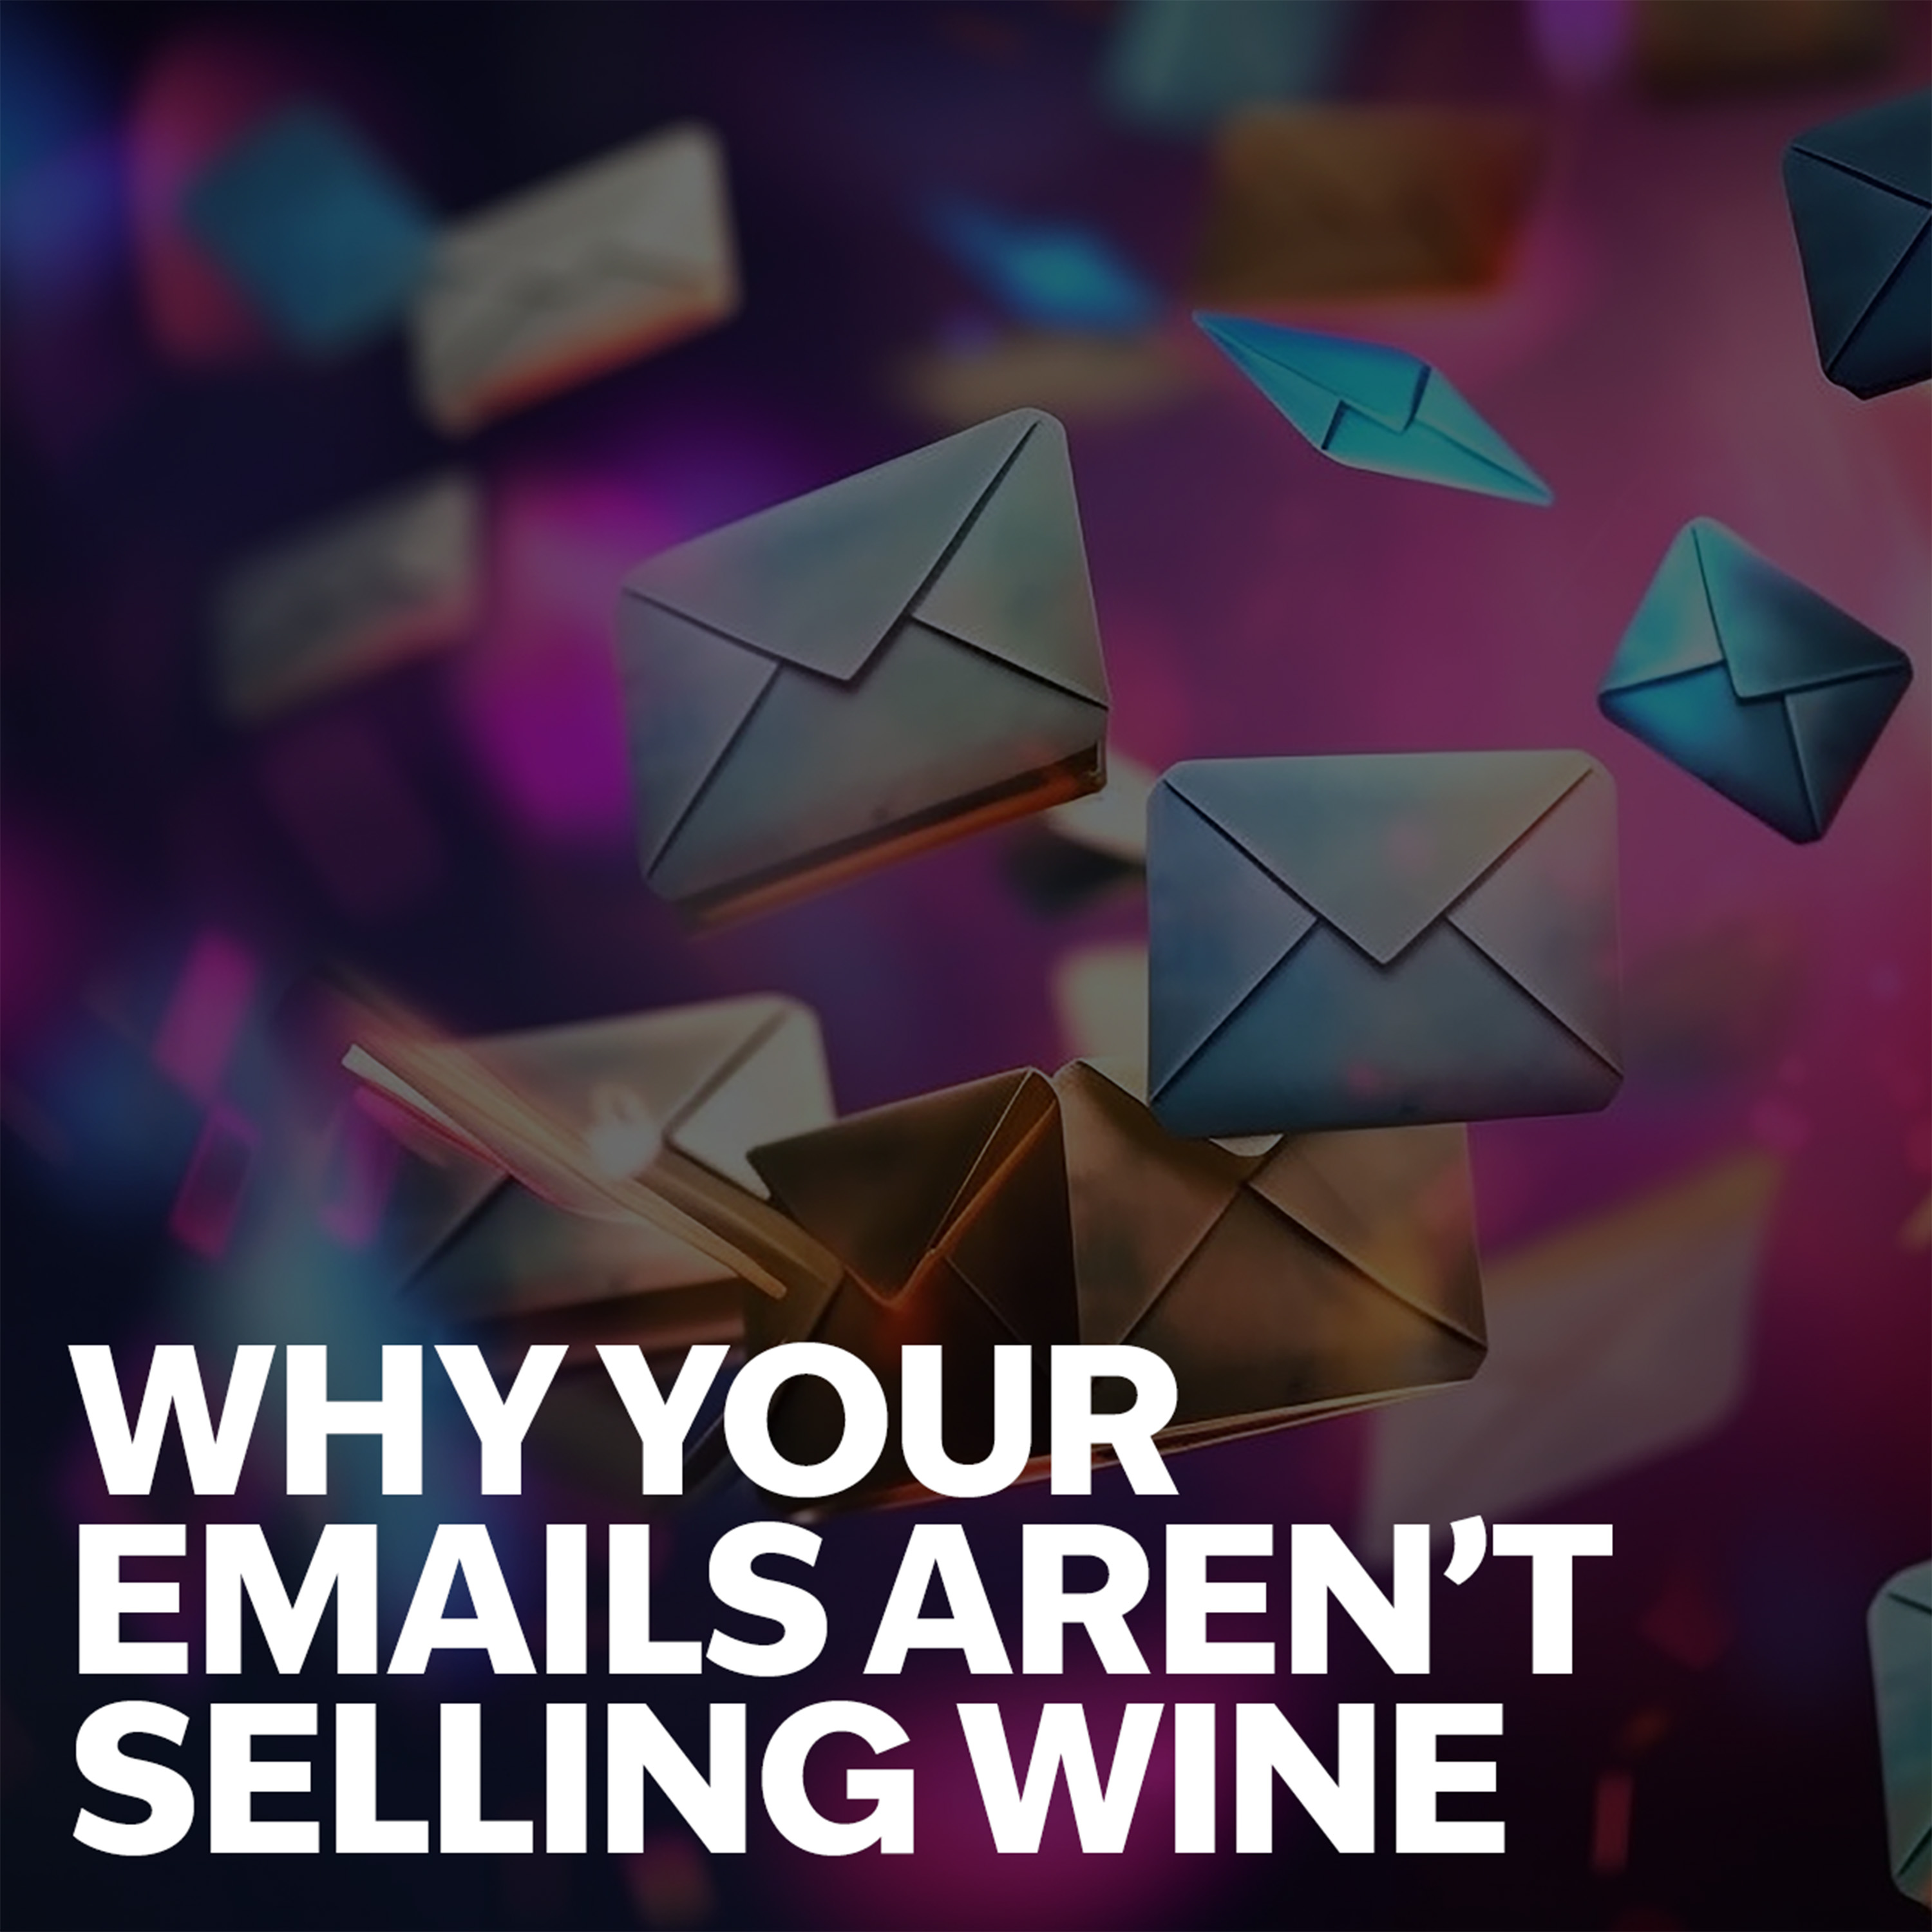 Why Your Emails Aren't Selling Wine: Top Wine Marketing Mistakes & How to Fix Them